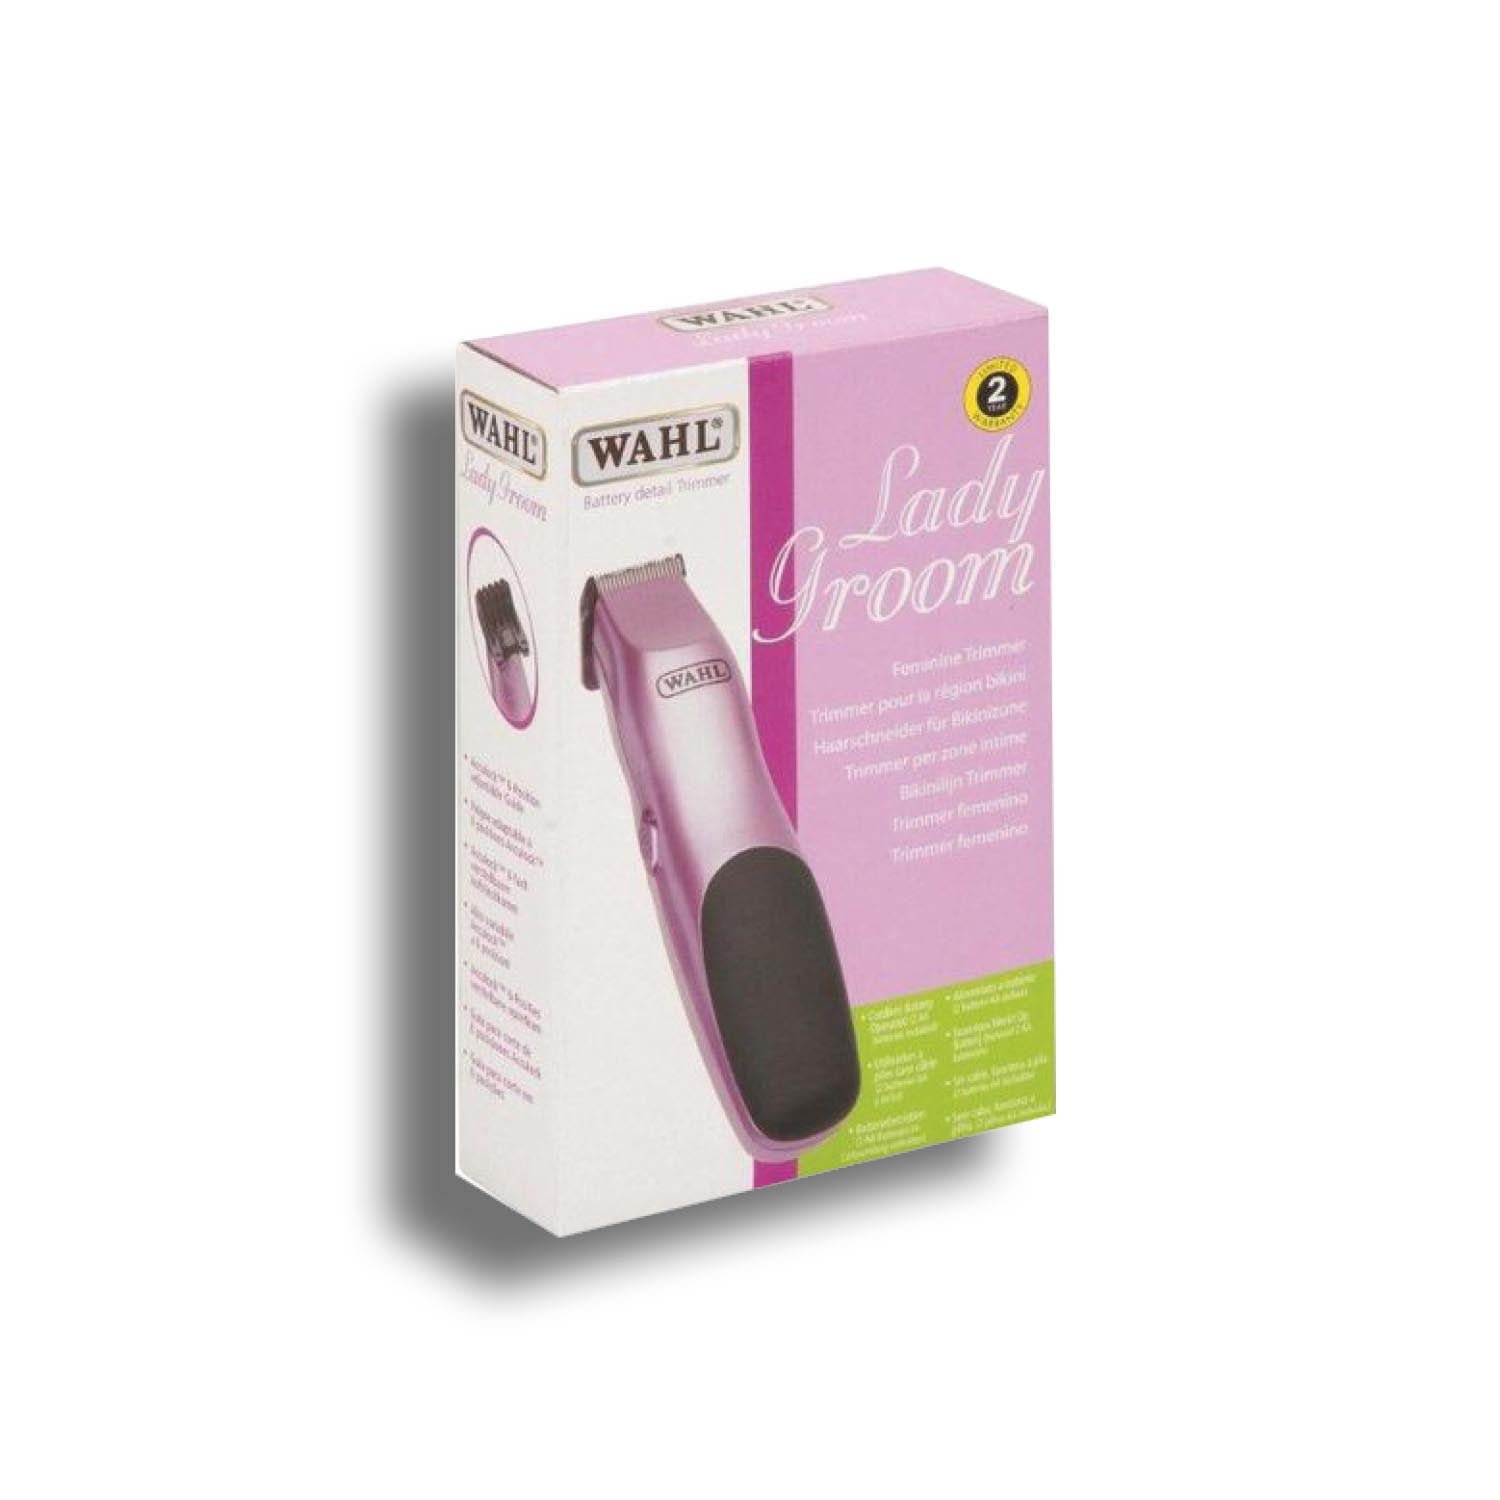 Wahl Lady Groom Cordless Battery Operated Feminine Trimmer, Pink